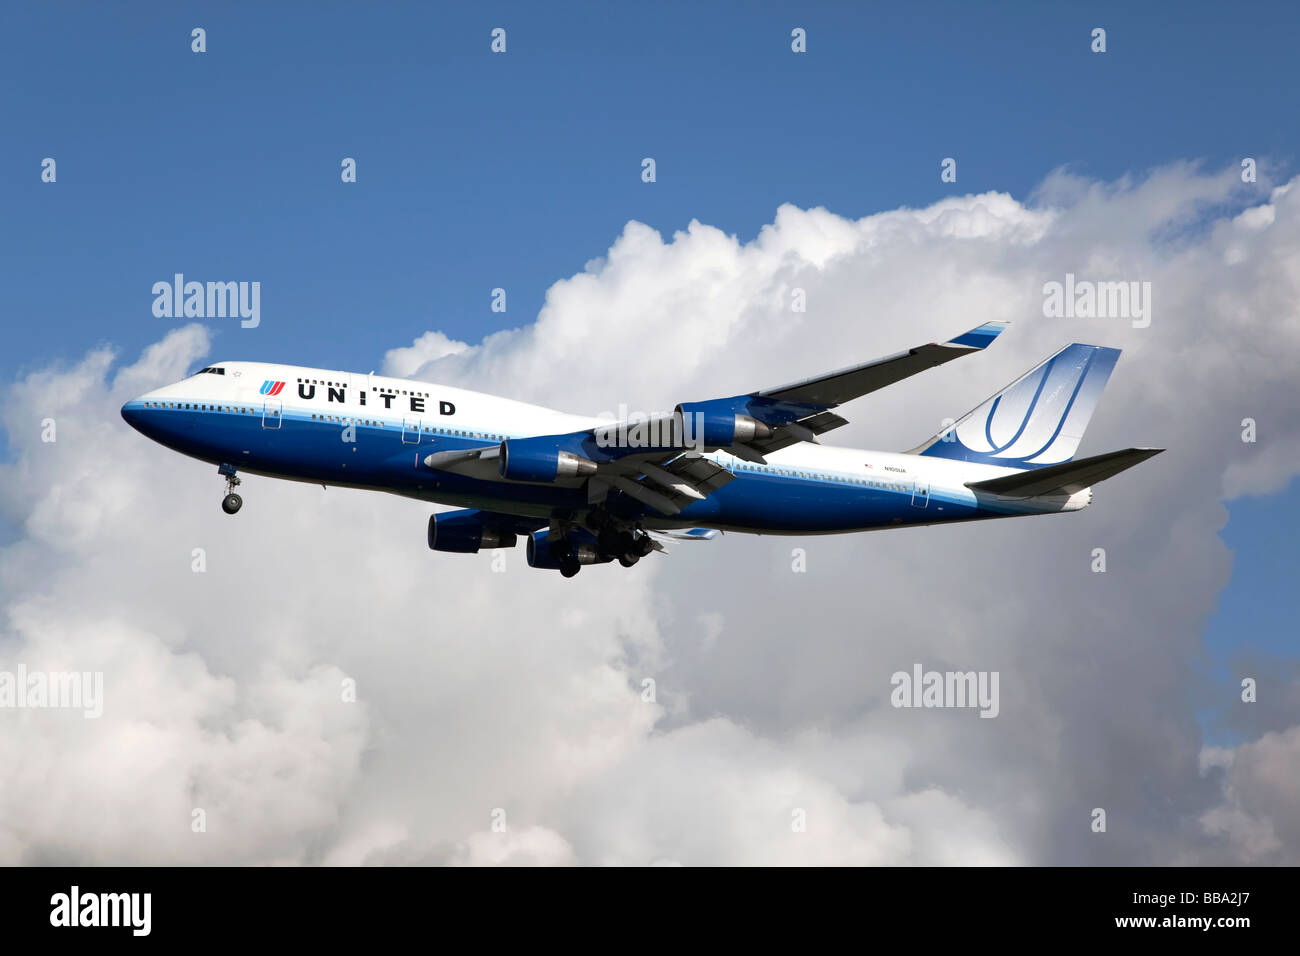 A Boeing 747 of United Airlines Stock Photo, Royalty Free Image: 24193183 - Alamy1300 x 956